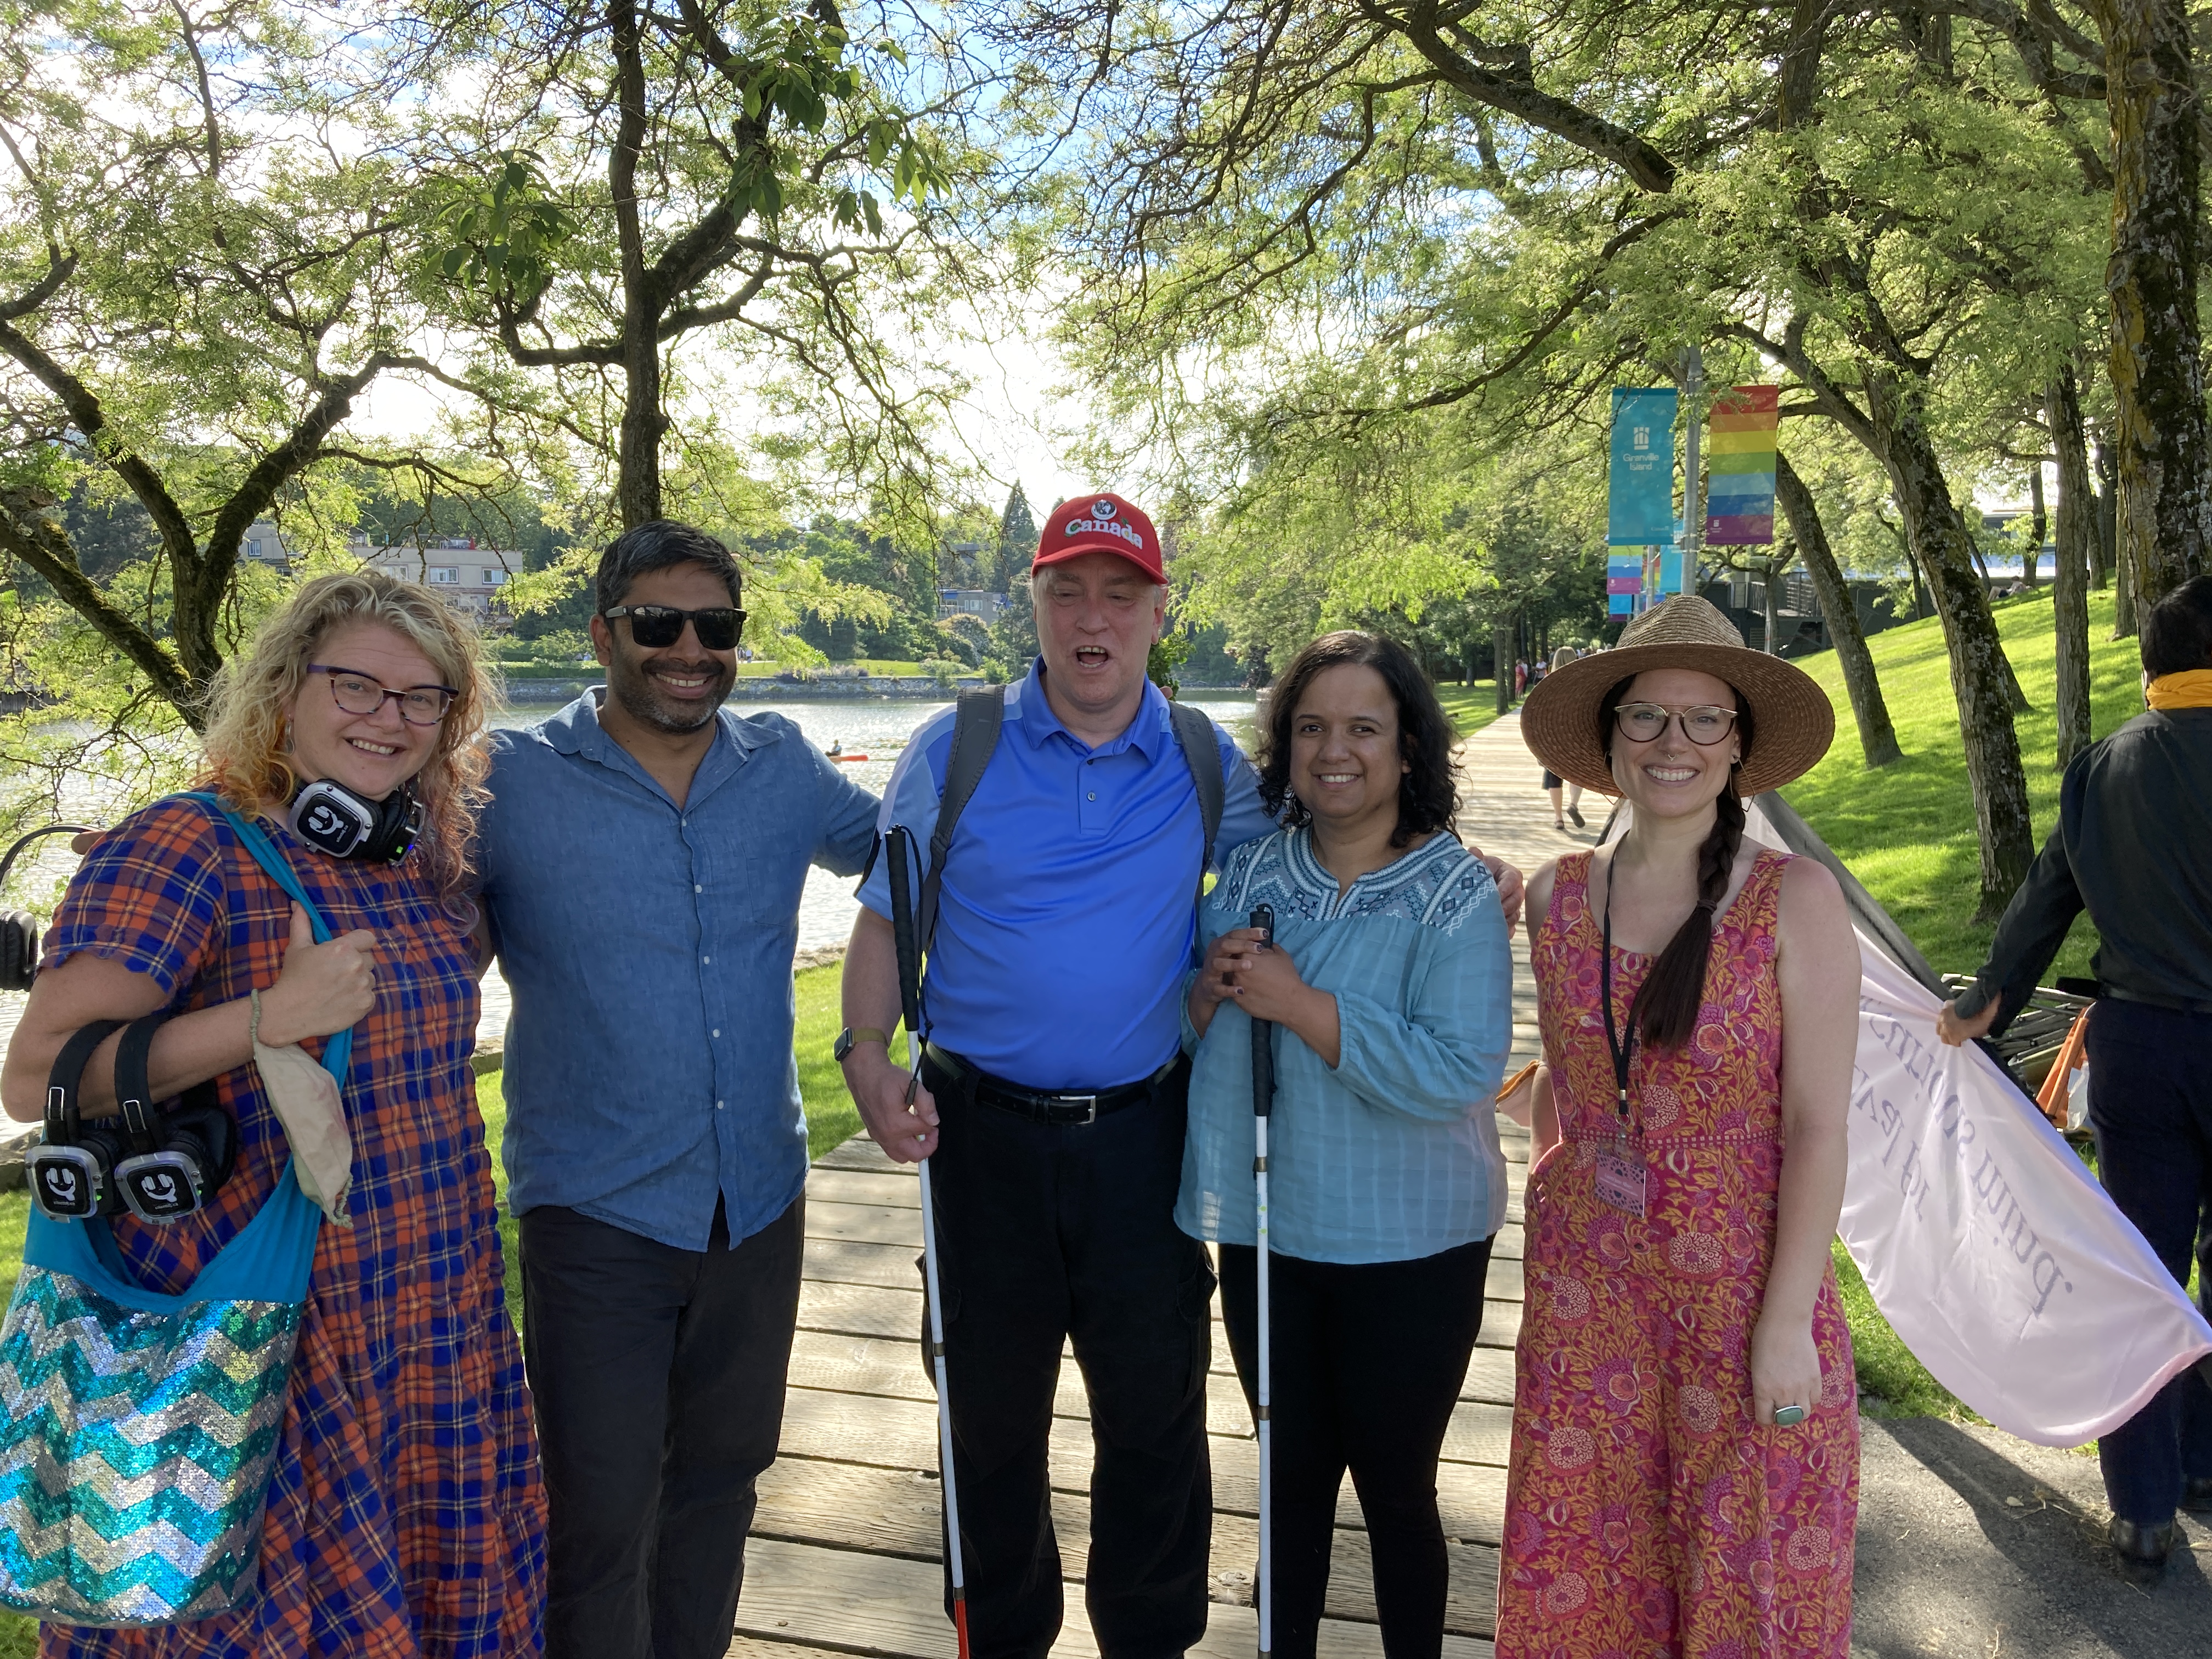 Kristy, Shawn and Annika stand with Indian Summer Festival co-founder Siresh Rao and festival Community Development Director, Laura June with leafy trees and the ocean in the background.